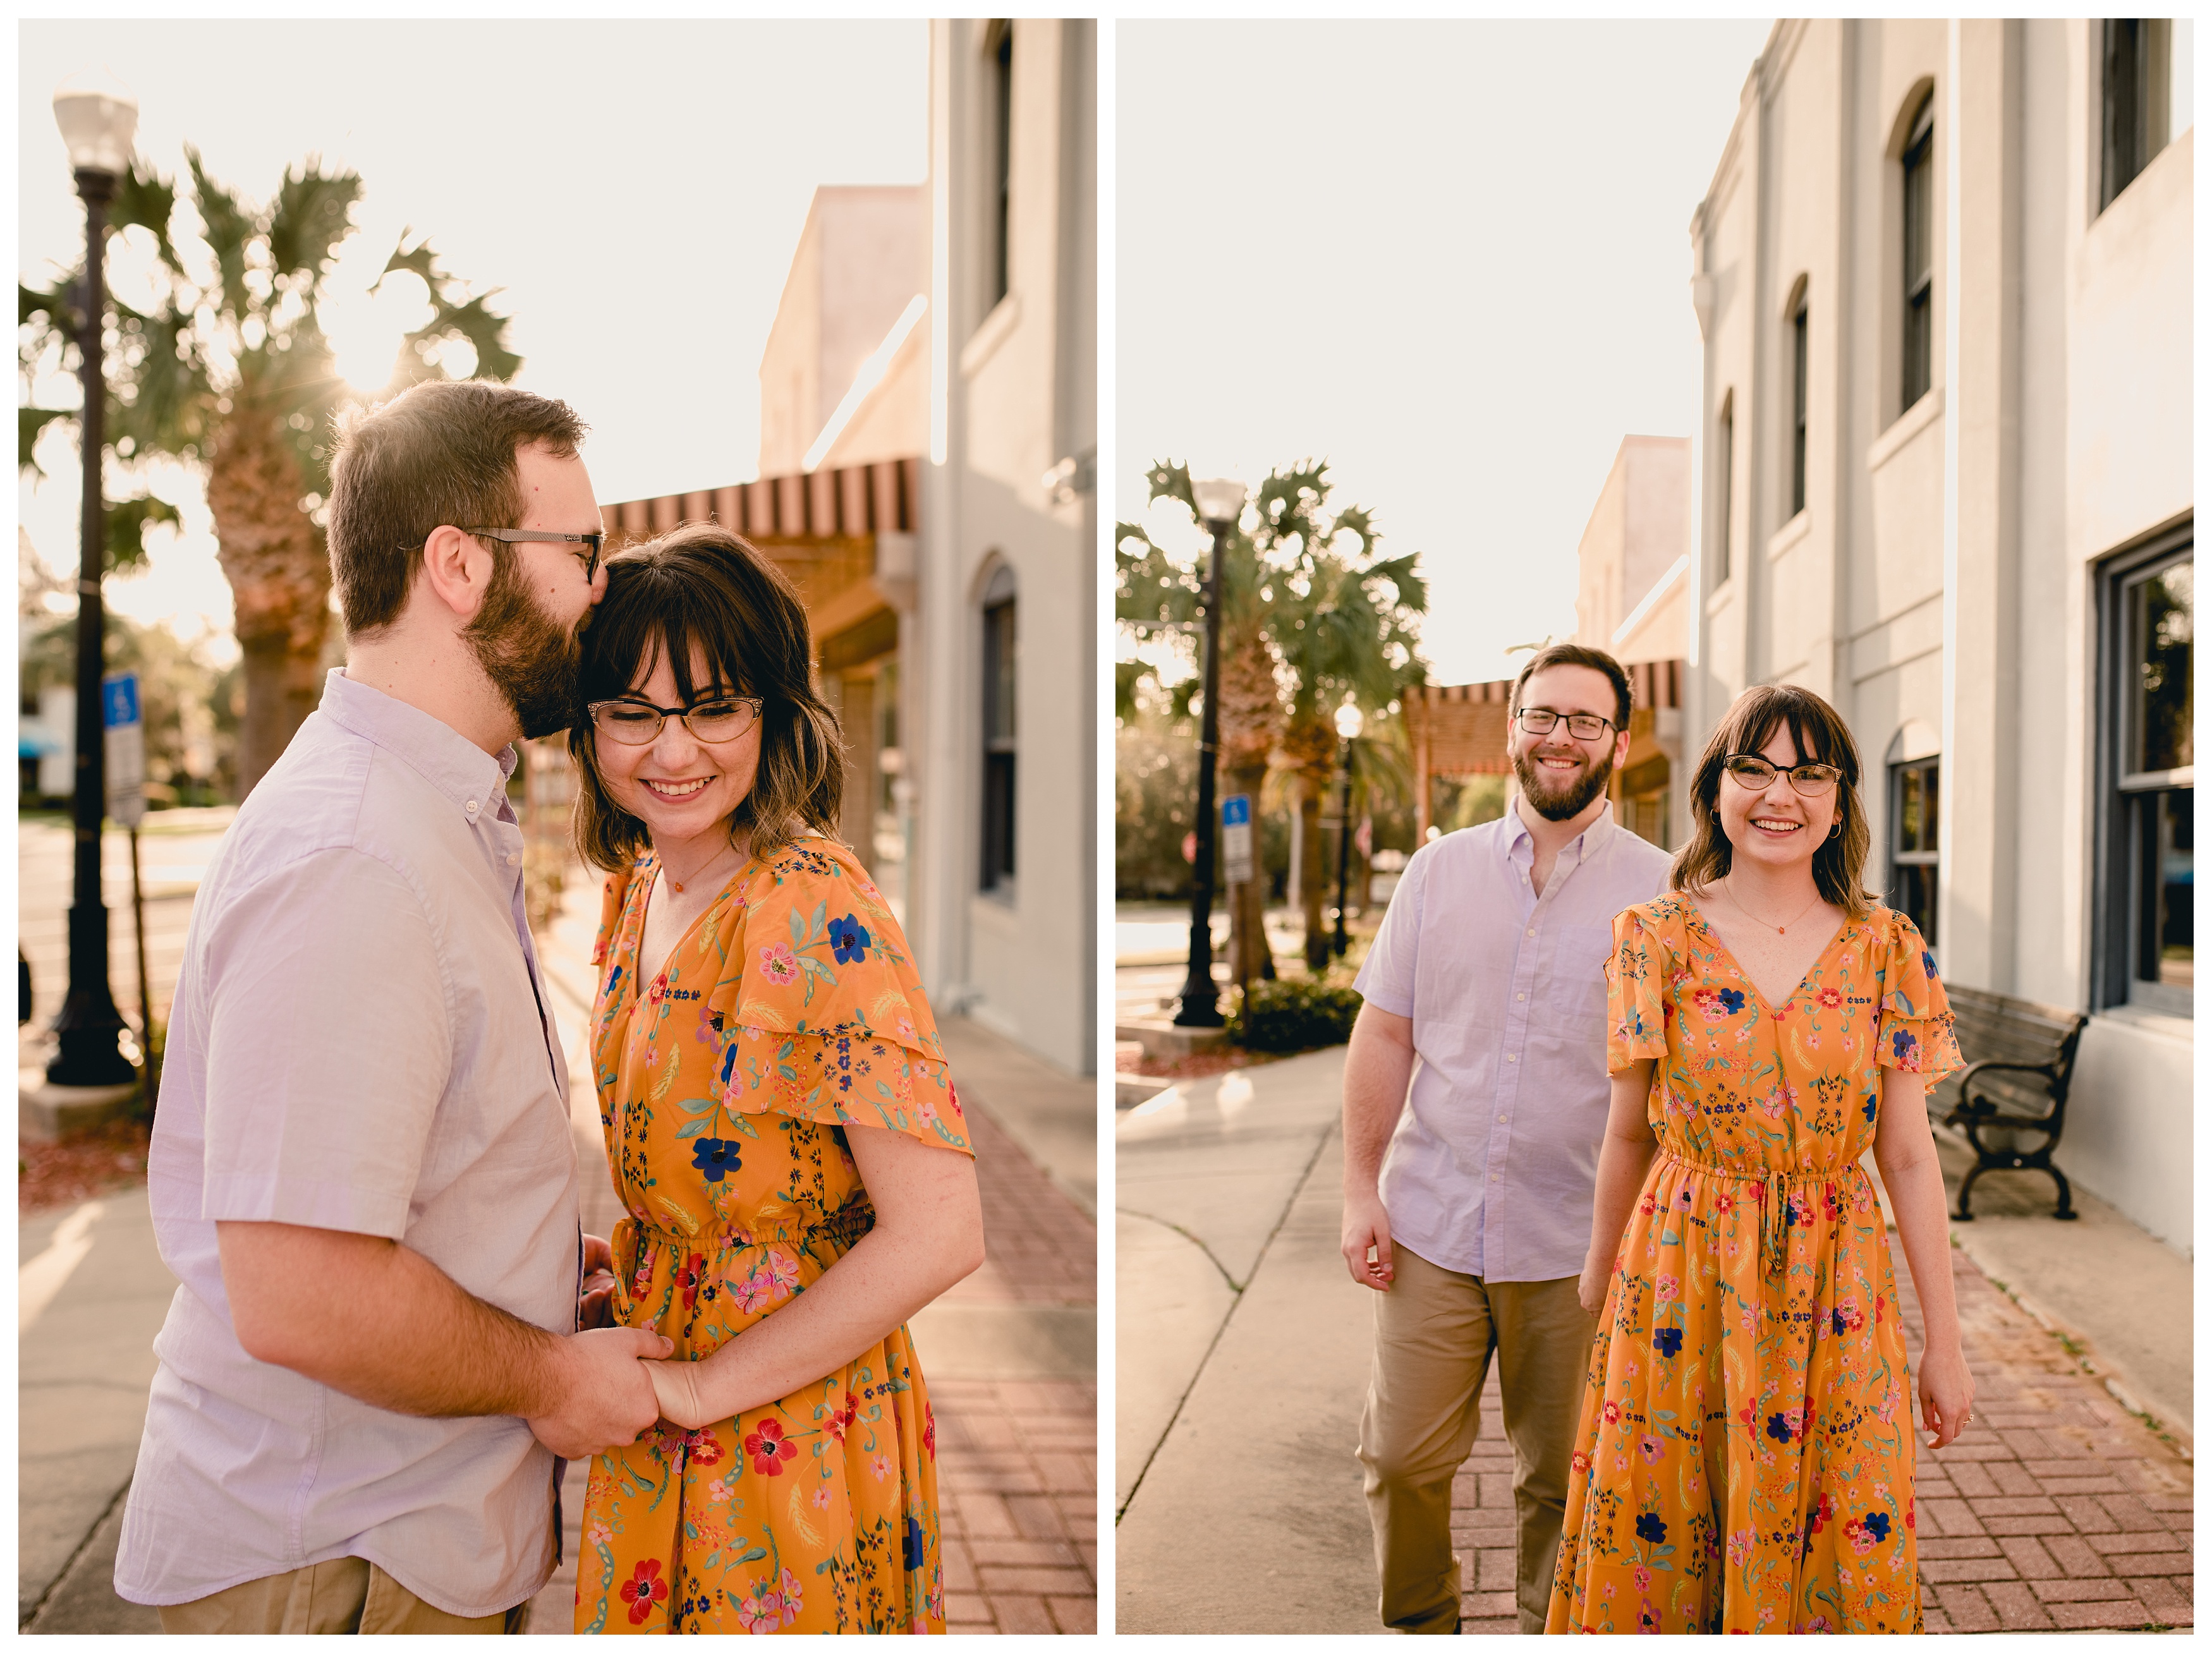 Tallahassee wedding photographer does engagement session with couple prior to wedding. Shelly Williams Photography